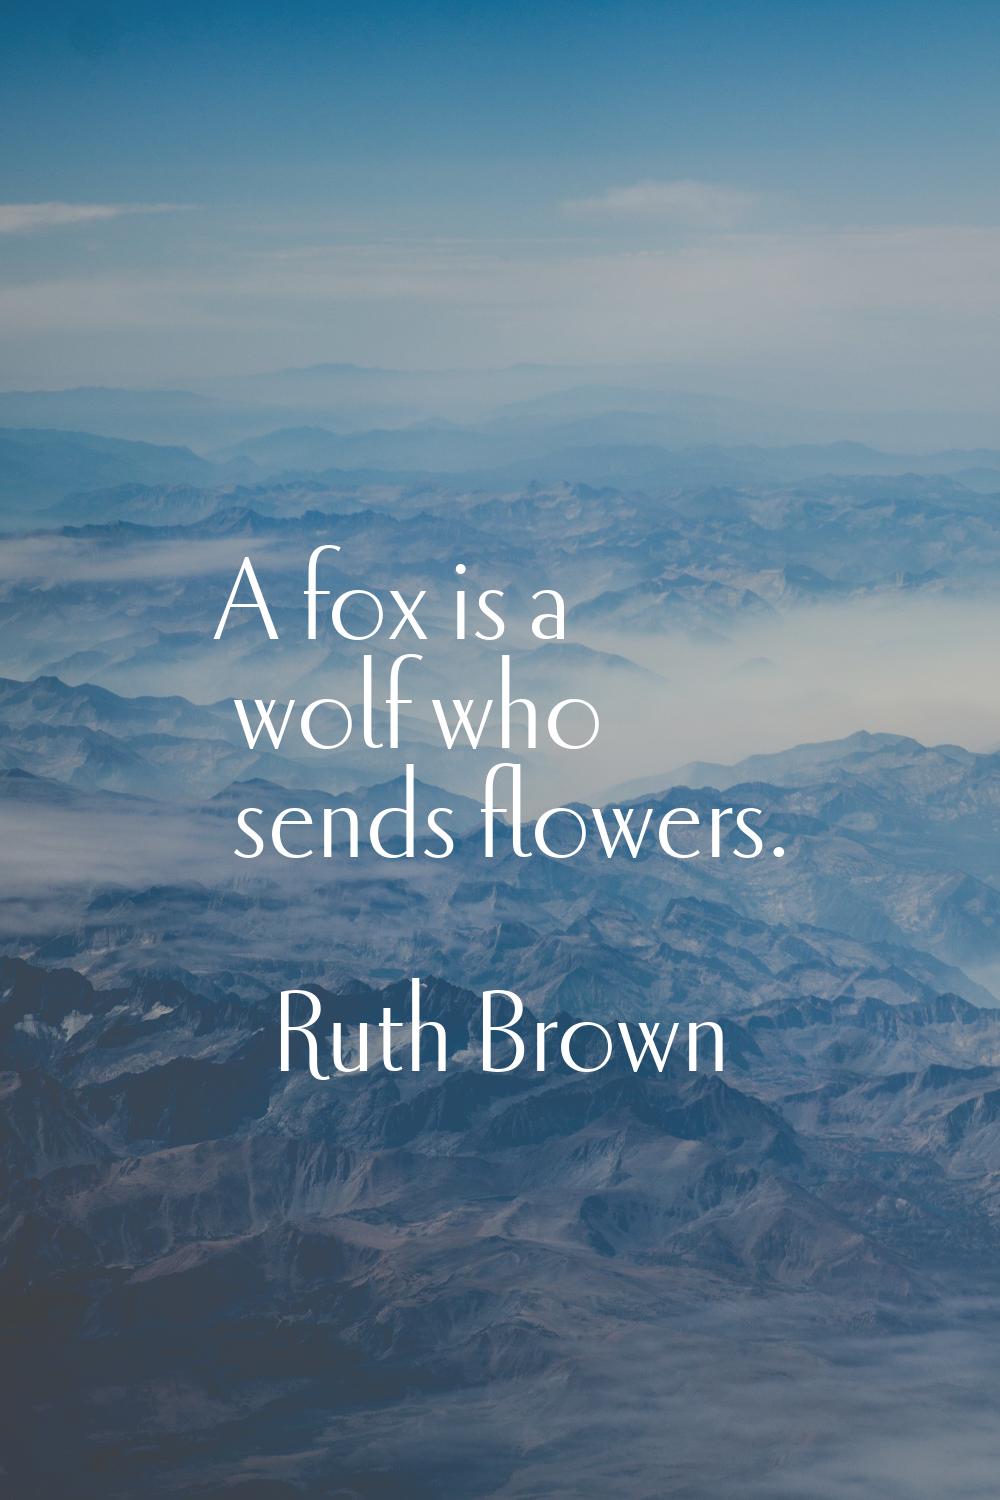 A fox is a wolf who sends flowers.